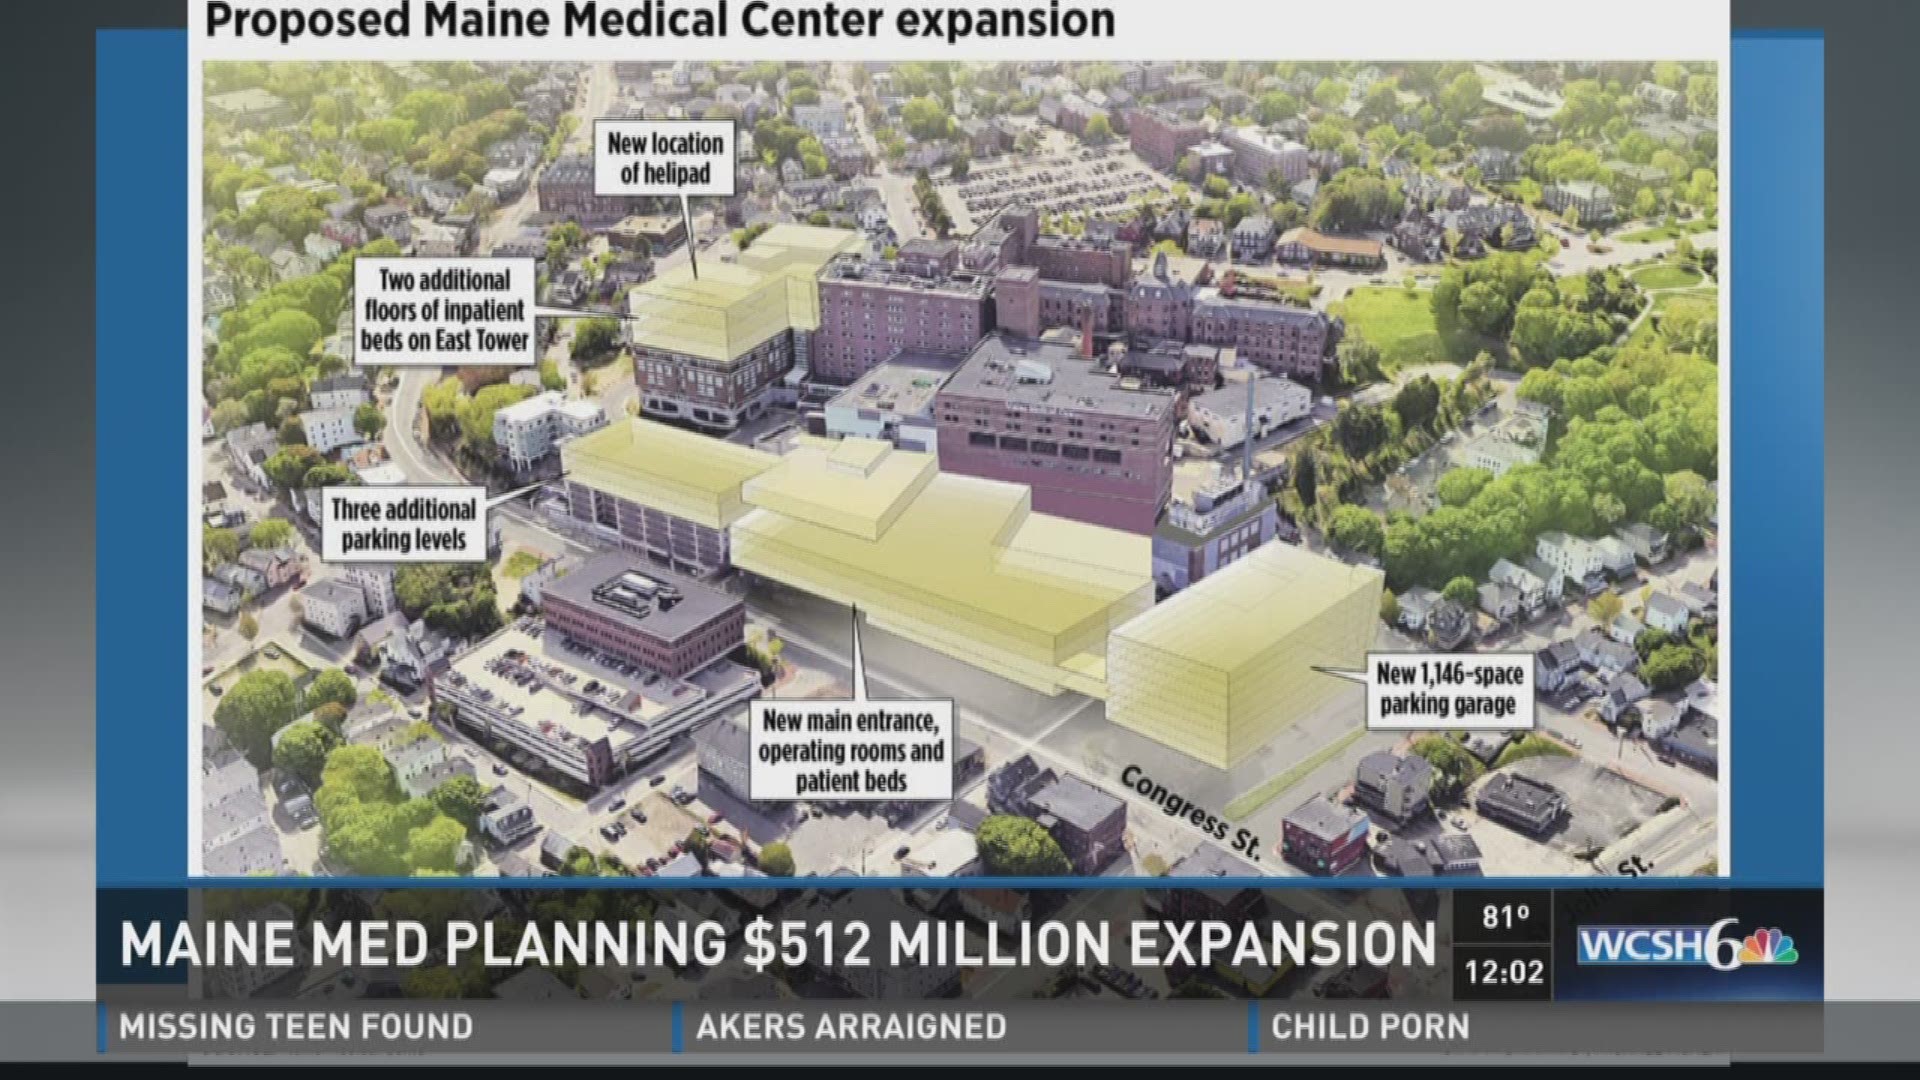 Is Maine Med for profit?